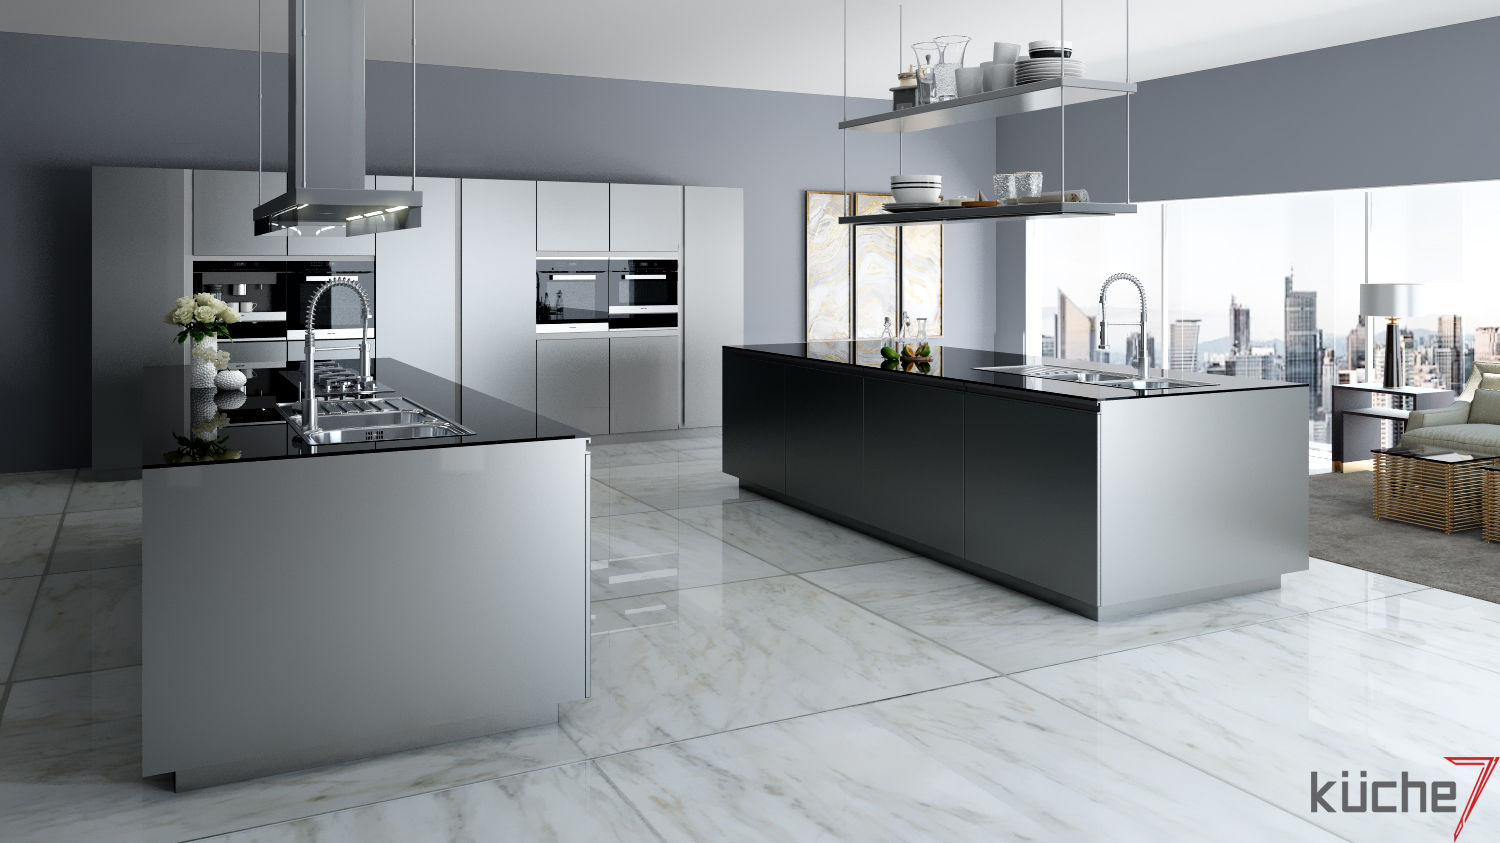 Luxury kitchens that outclasses all other kitchens you've seen, Küche7 Küche7 Dapur Modern Besi/Baja